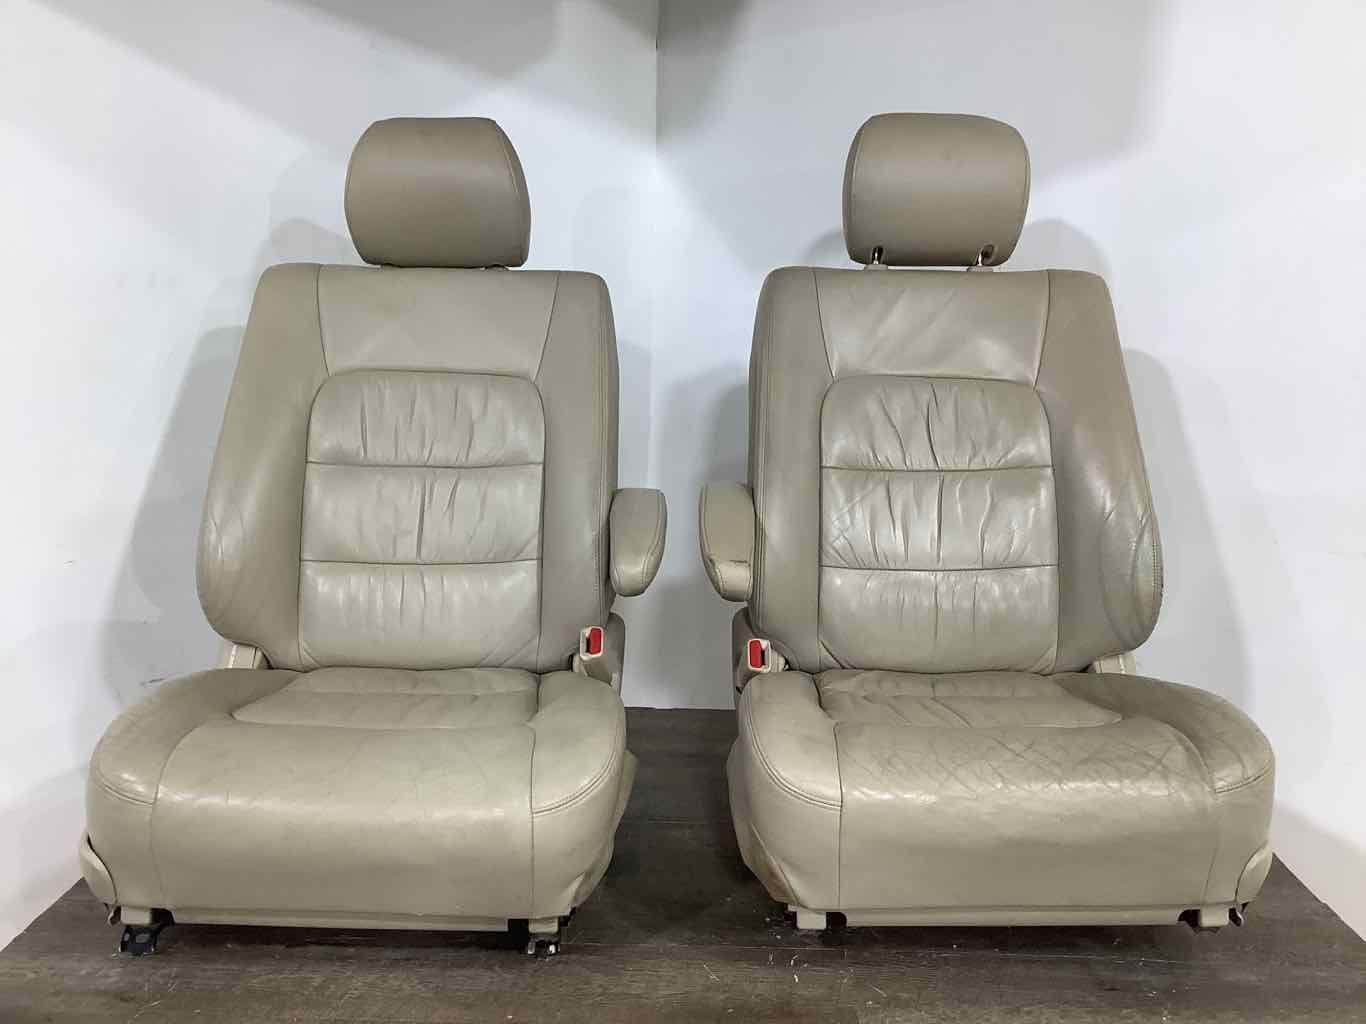 03-07 Lexus LX470 1ST & 2ND Row Leather Seat Set (Ivory LG00) See Notes